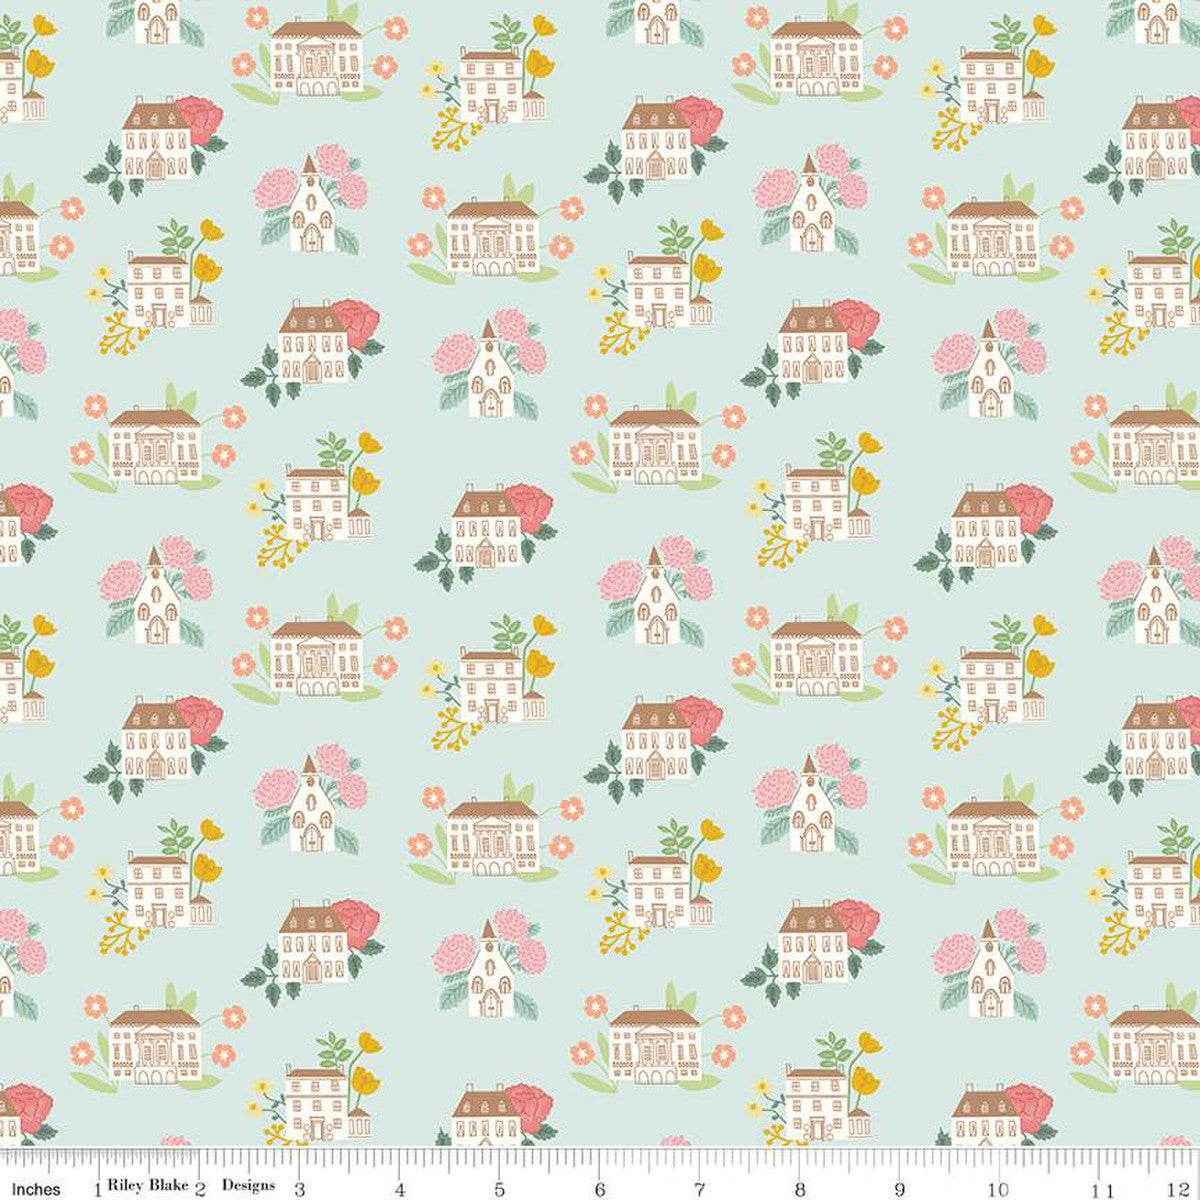 Jane Austen Emma Houses Print by Citrus + Mint for Riley Blake Designs mint green background with township saltbox colonial houses and small churches in cream with pink and yellow flowers behind each soft and beautiful high quality designer fabric for piecing quilts garments clothing bags and sewing projects material